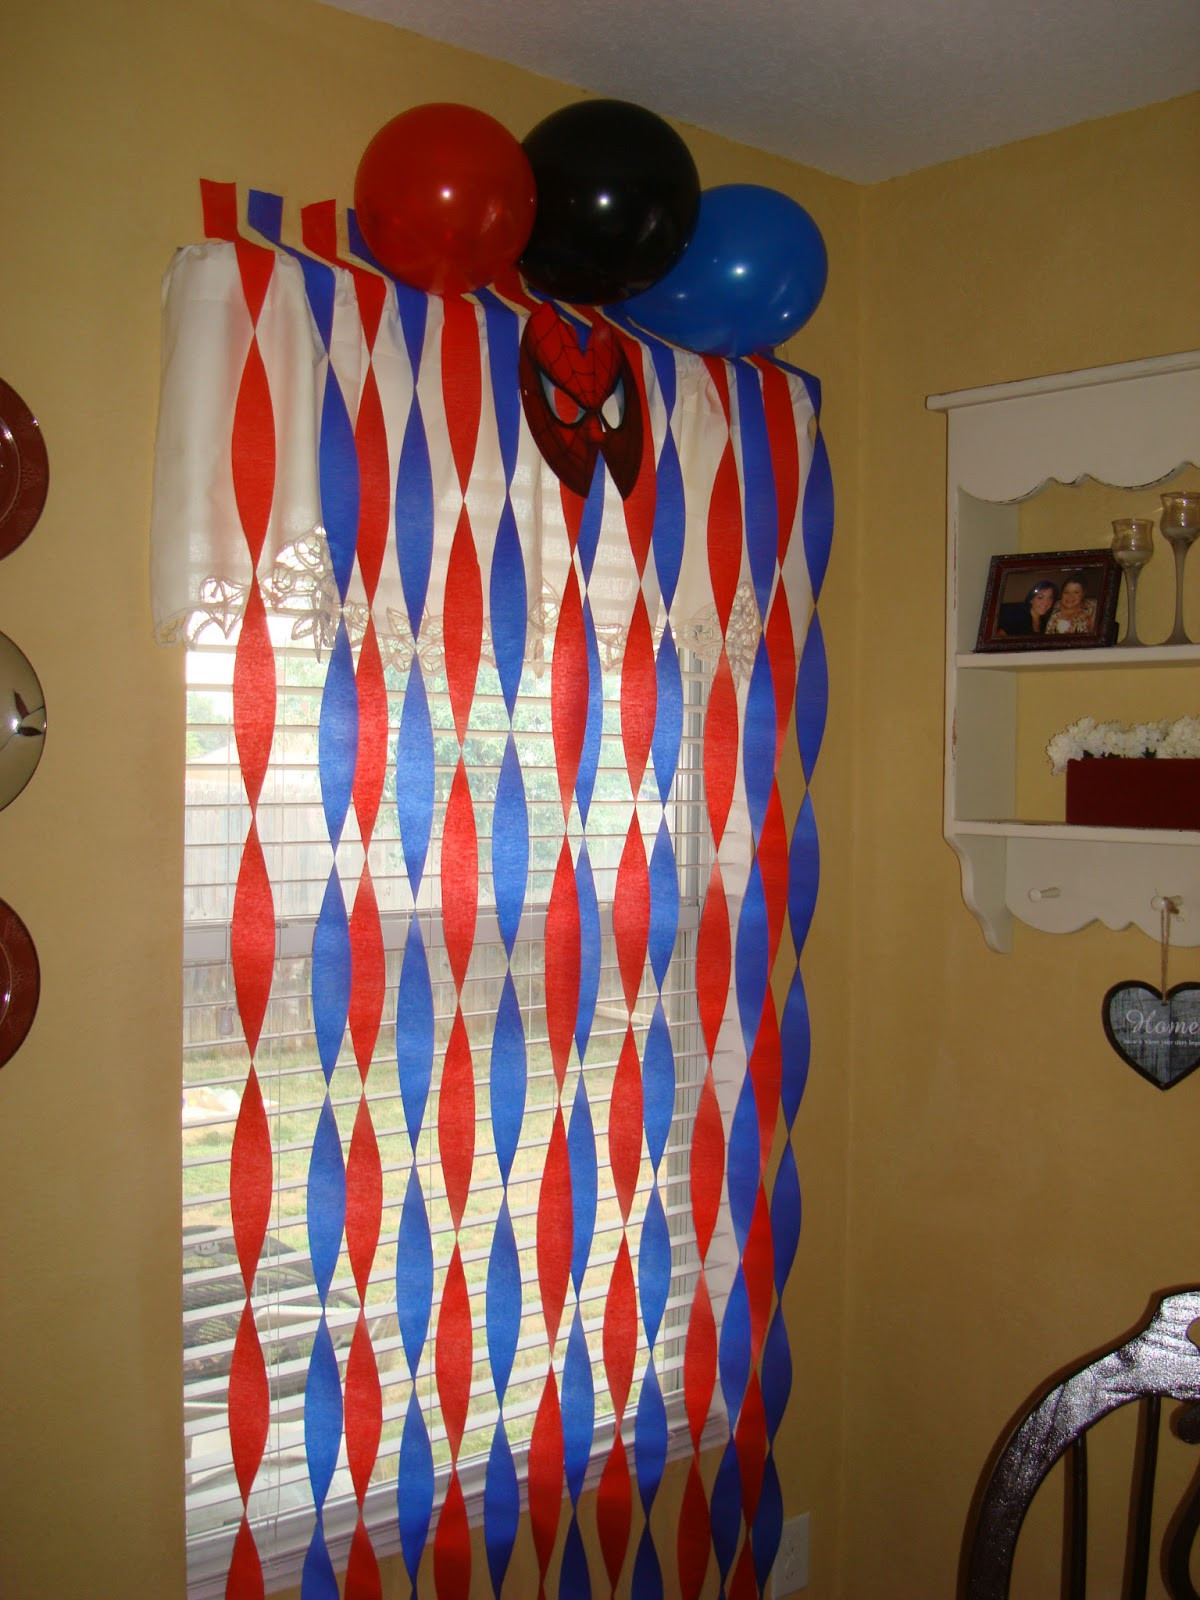 Spiderman Birthday Party Decorations
 Seasons and Stories The Spideriest Spiderman Party EVER